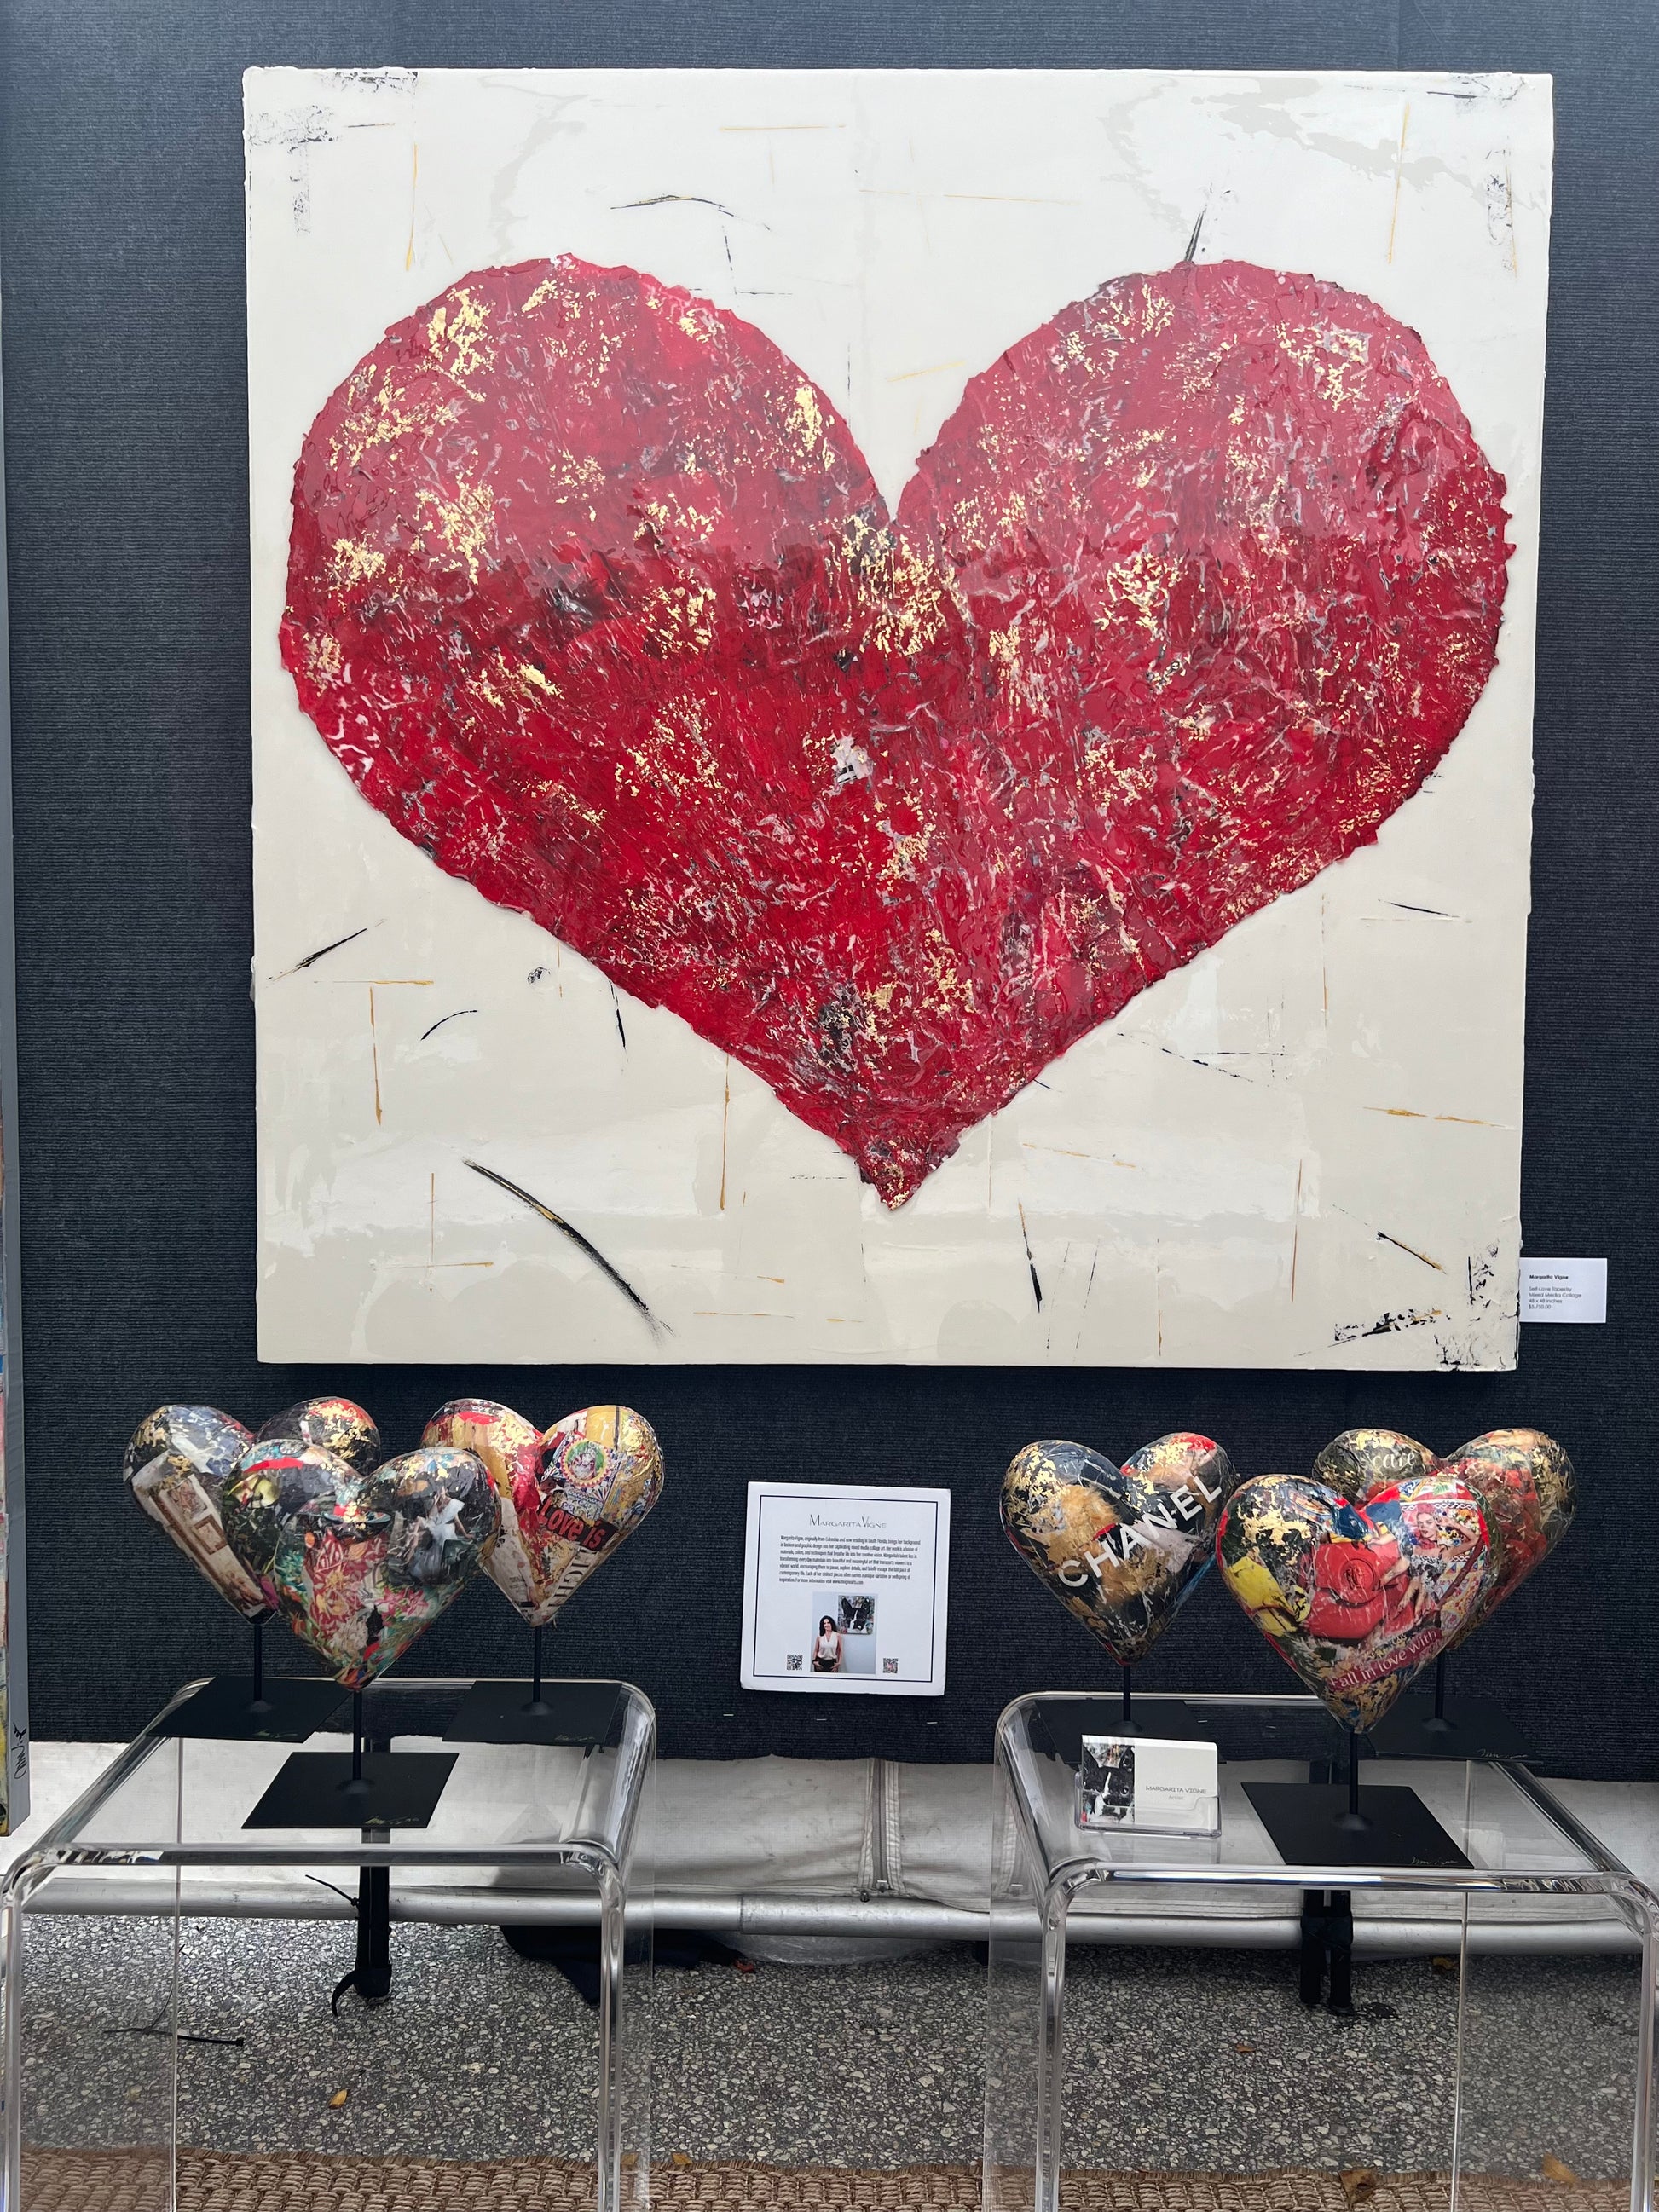 Exquisite handcrafted heart mini sculpture featuring a unique blend of mixed media collage and resin. Crafted with styrofoam, gesso, collage, and resin, measuring 8.5" in length and 8" in width. Elevate your space with this carefully designed piece.